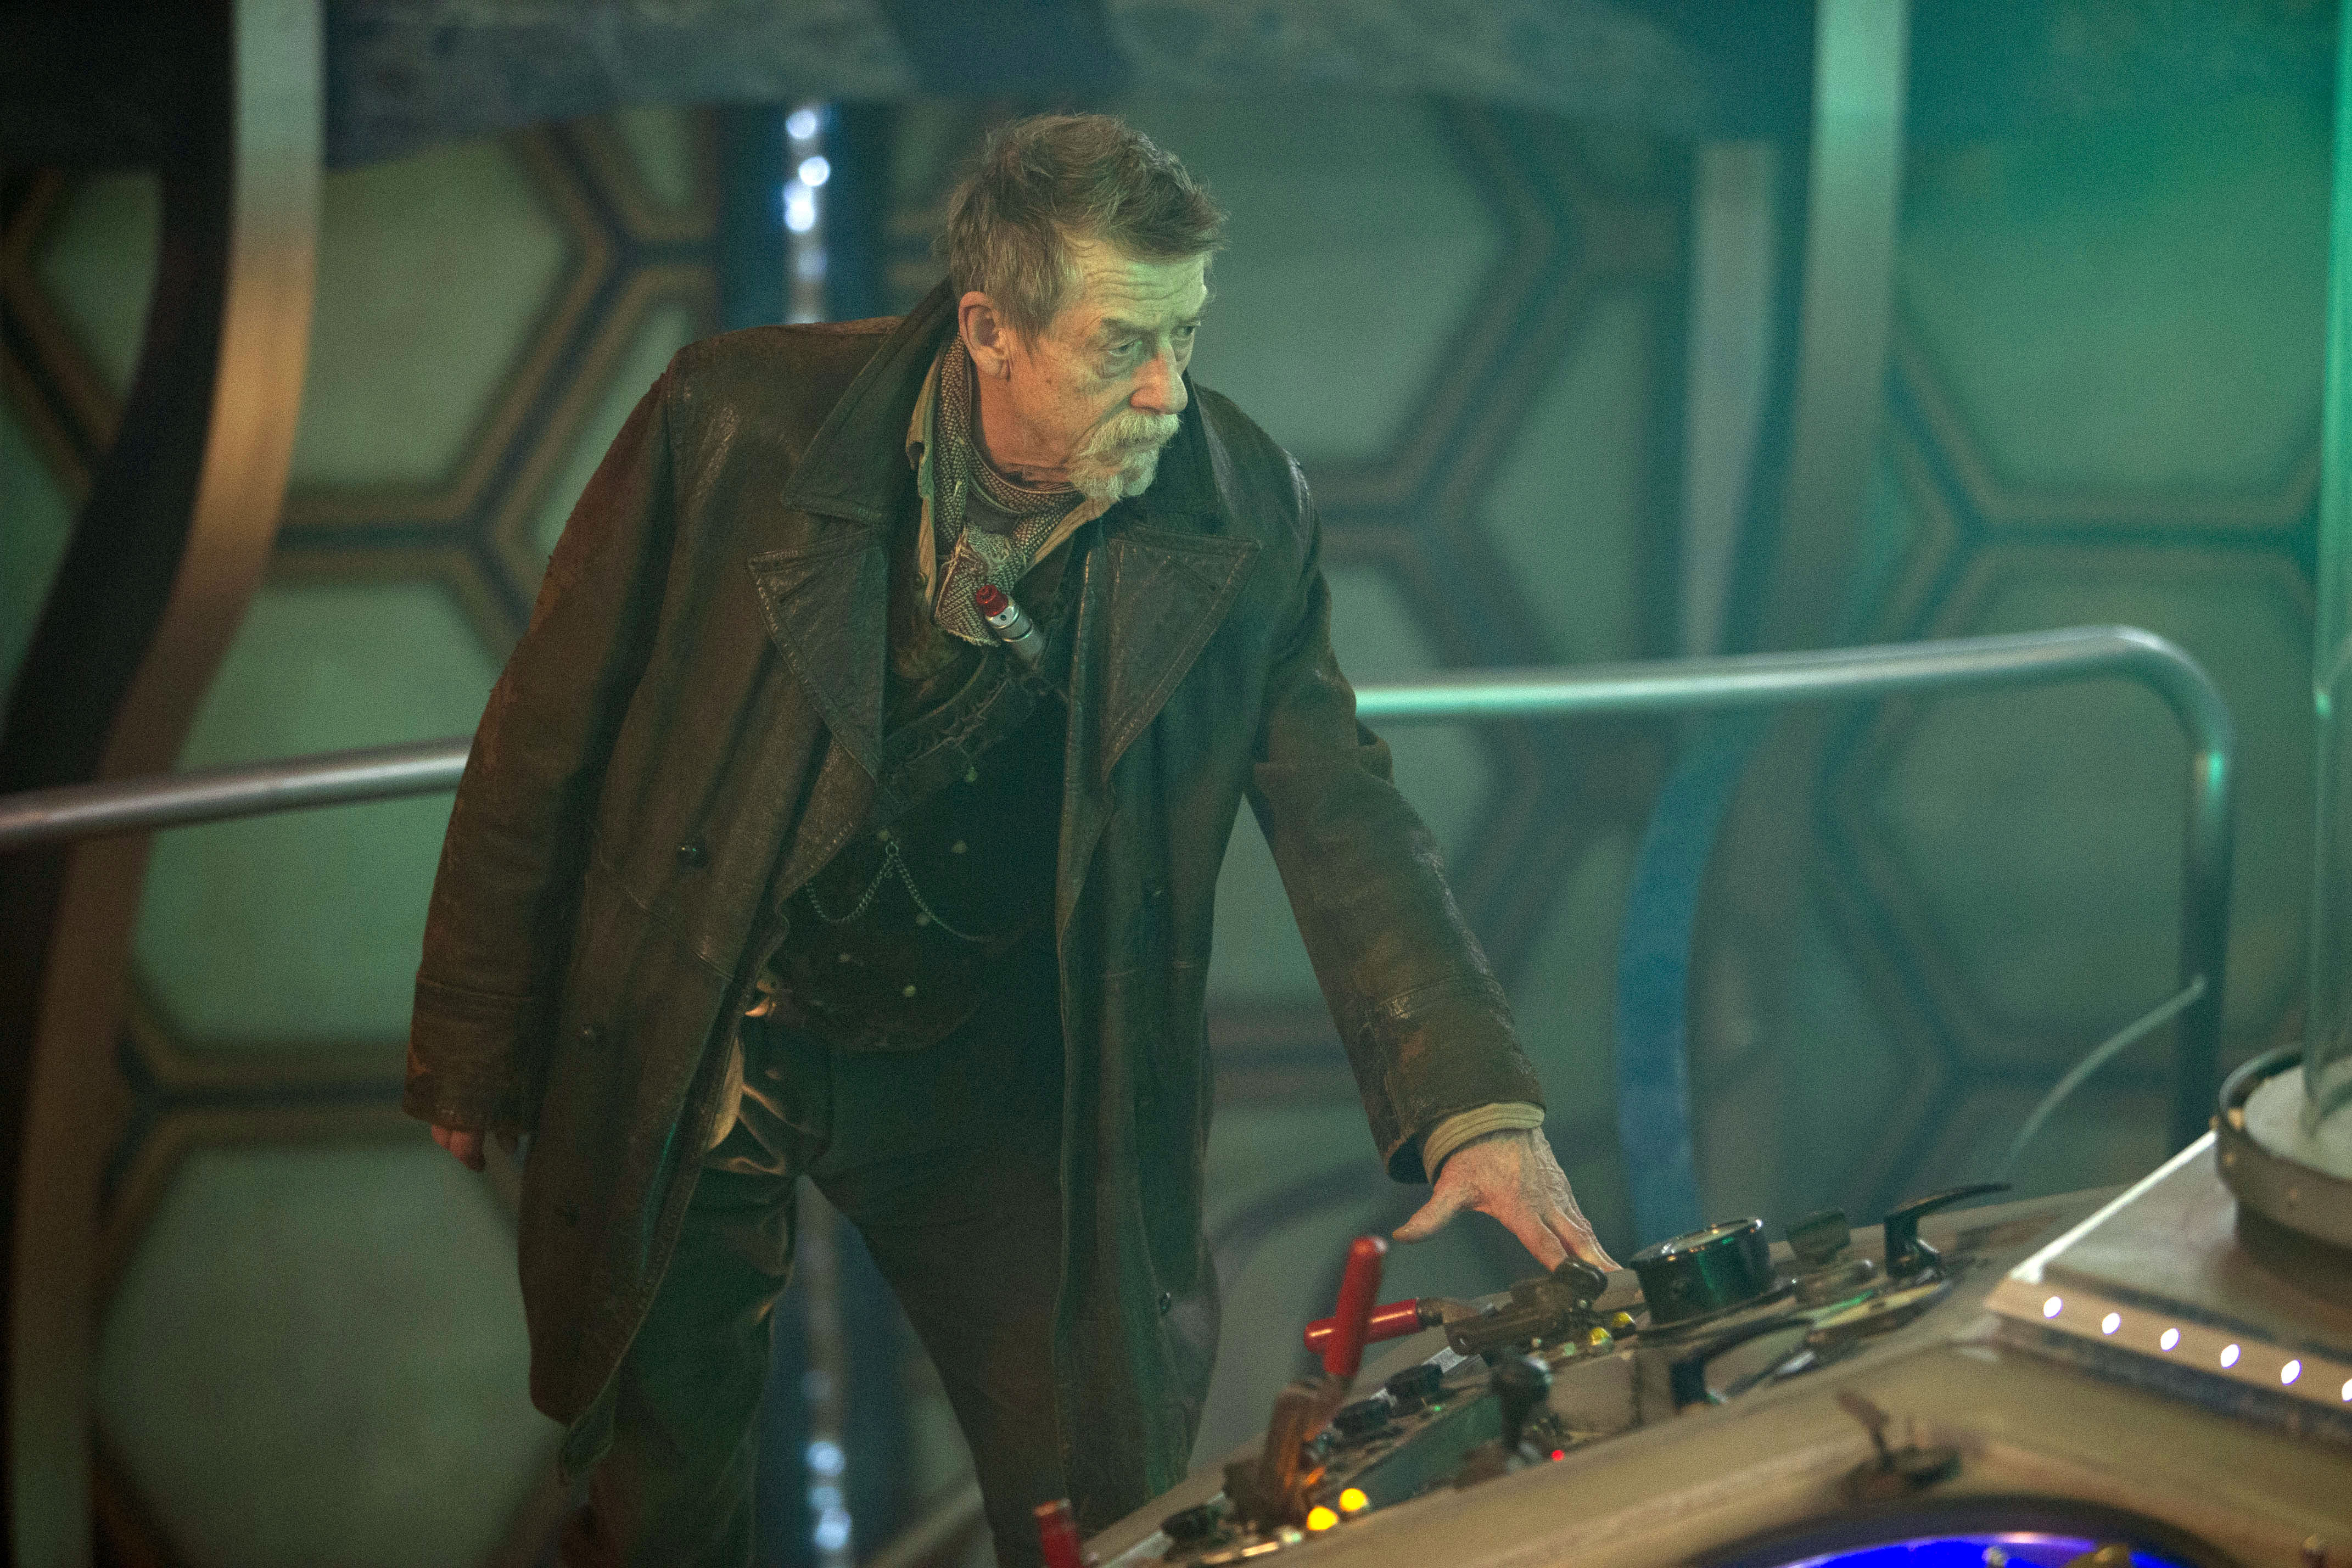 John Hurt in "The Day of the Doctor" (Photo: Credit: Adrian Rogers, © BBC)